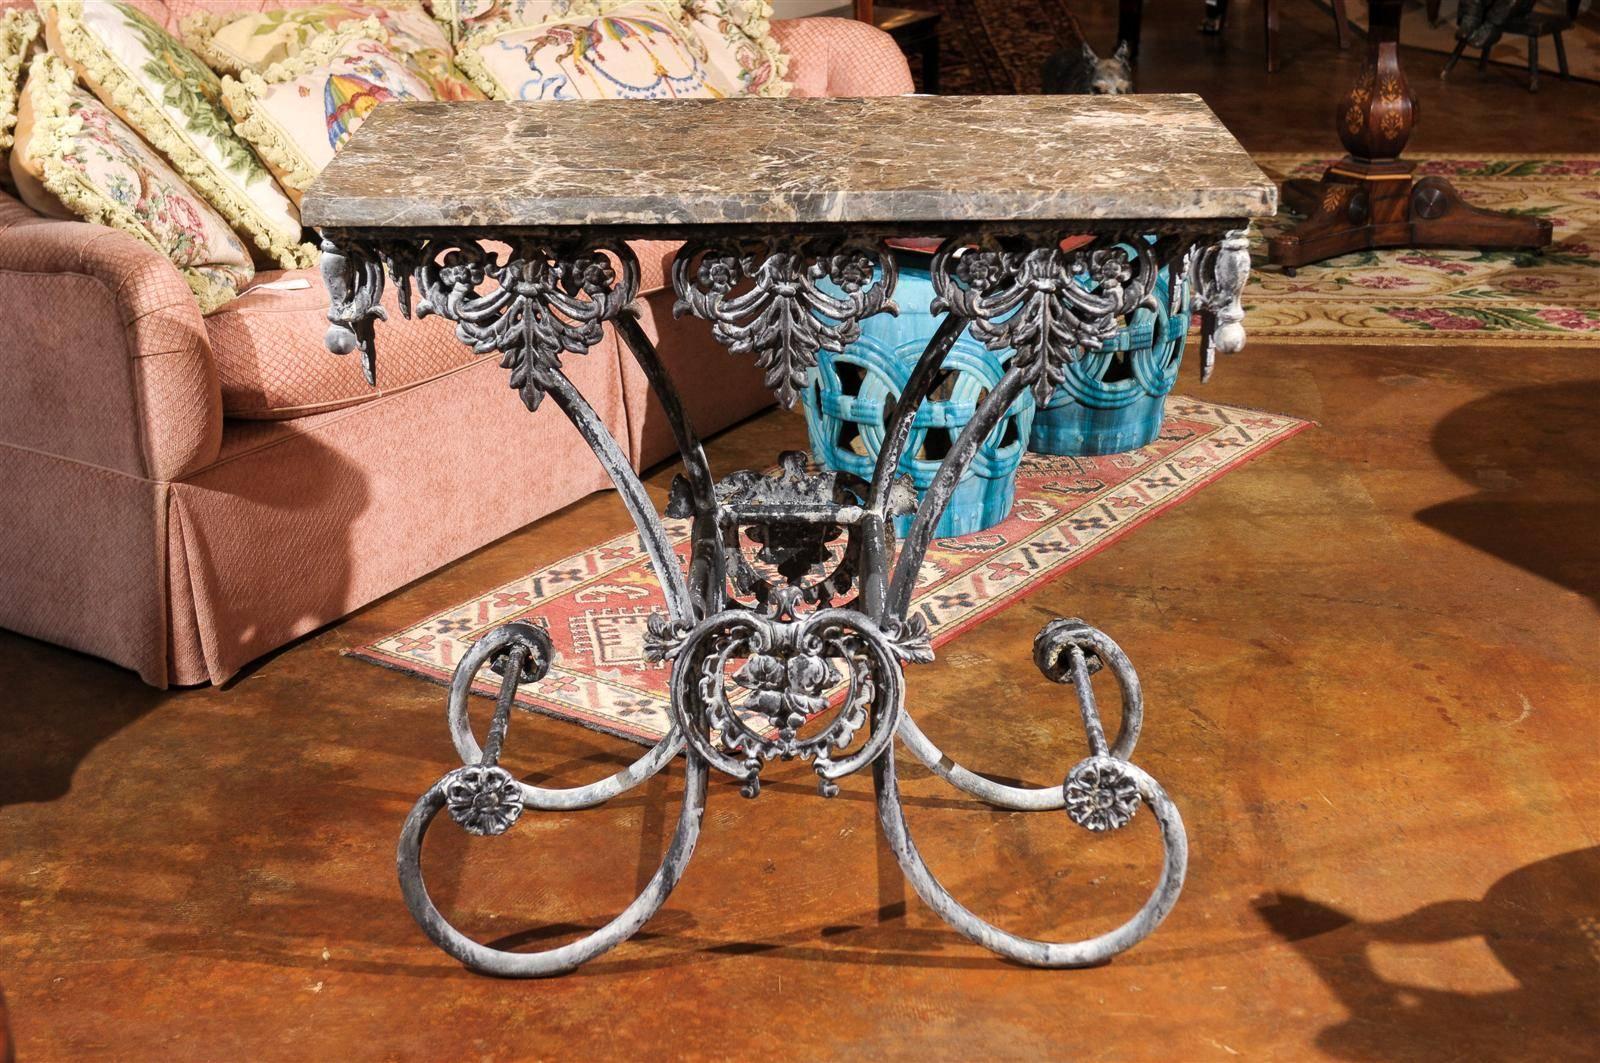 This wonderful pastry table base is hand-forged with an Emperador marble top.
It is a piece that could be used in a variety of spaces throughout the home.